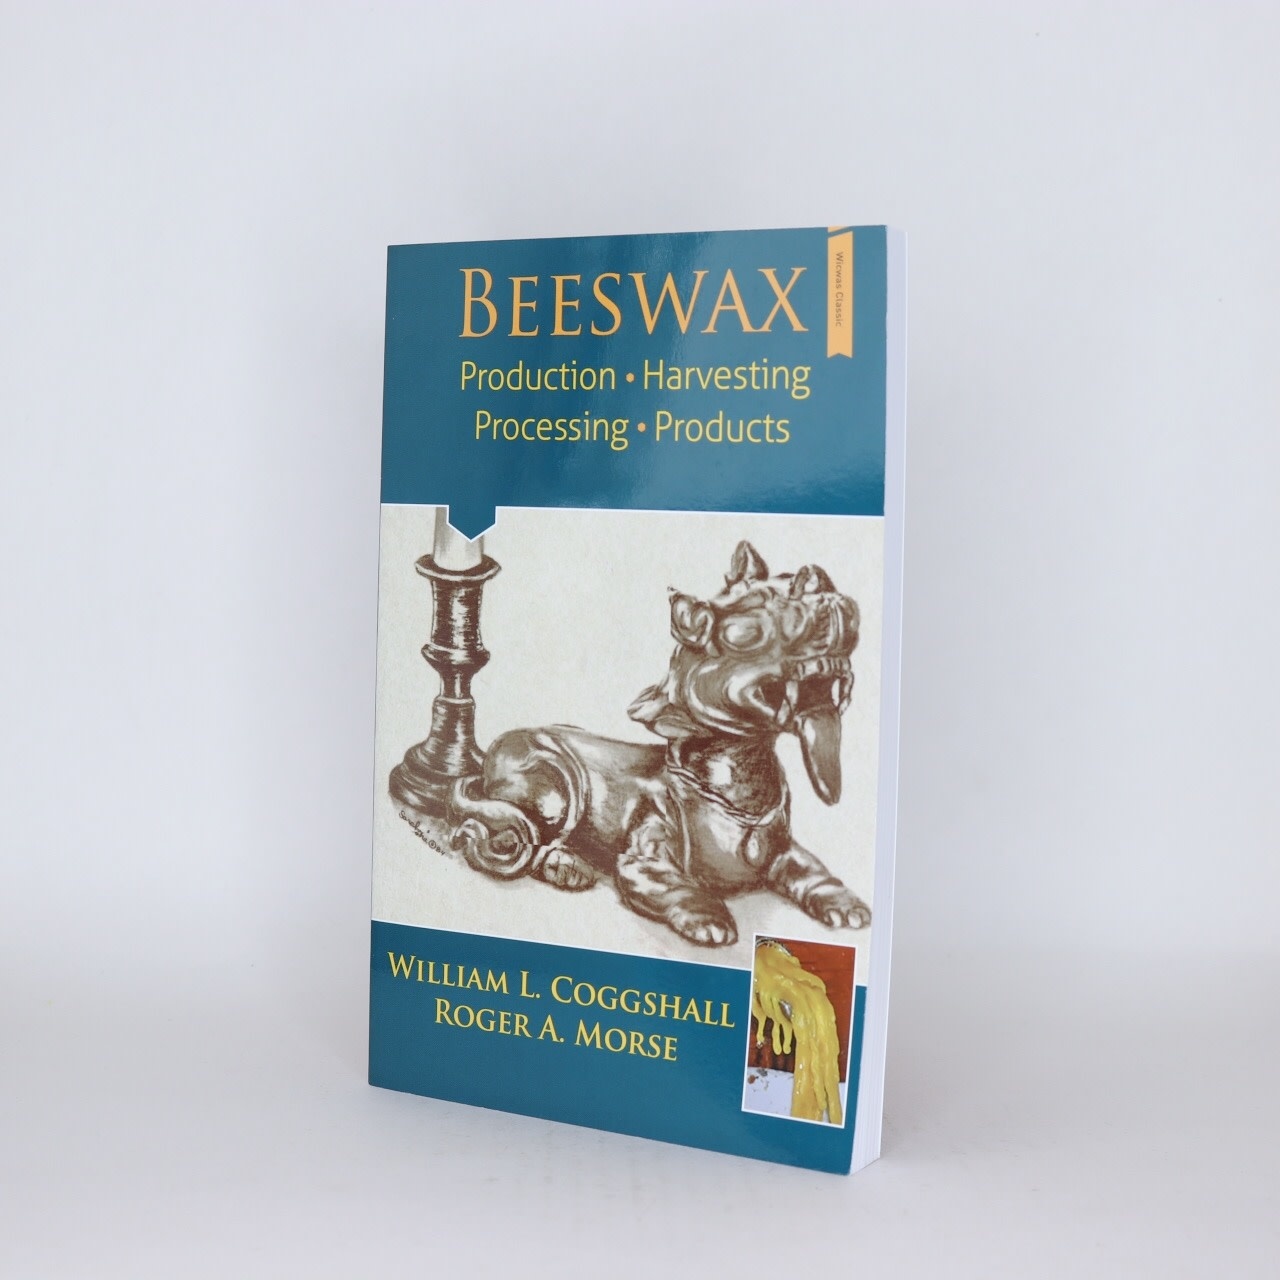 Beeswax: Production, Harvesting, Processing, Products